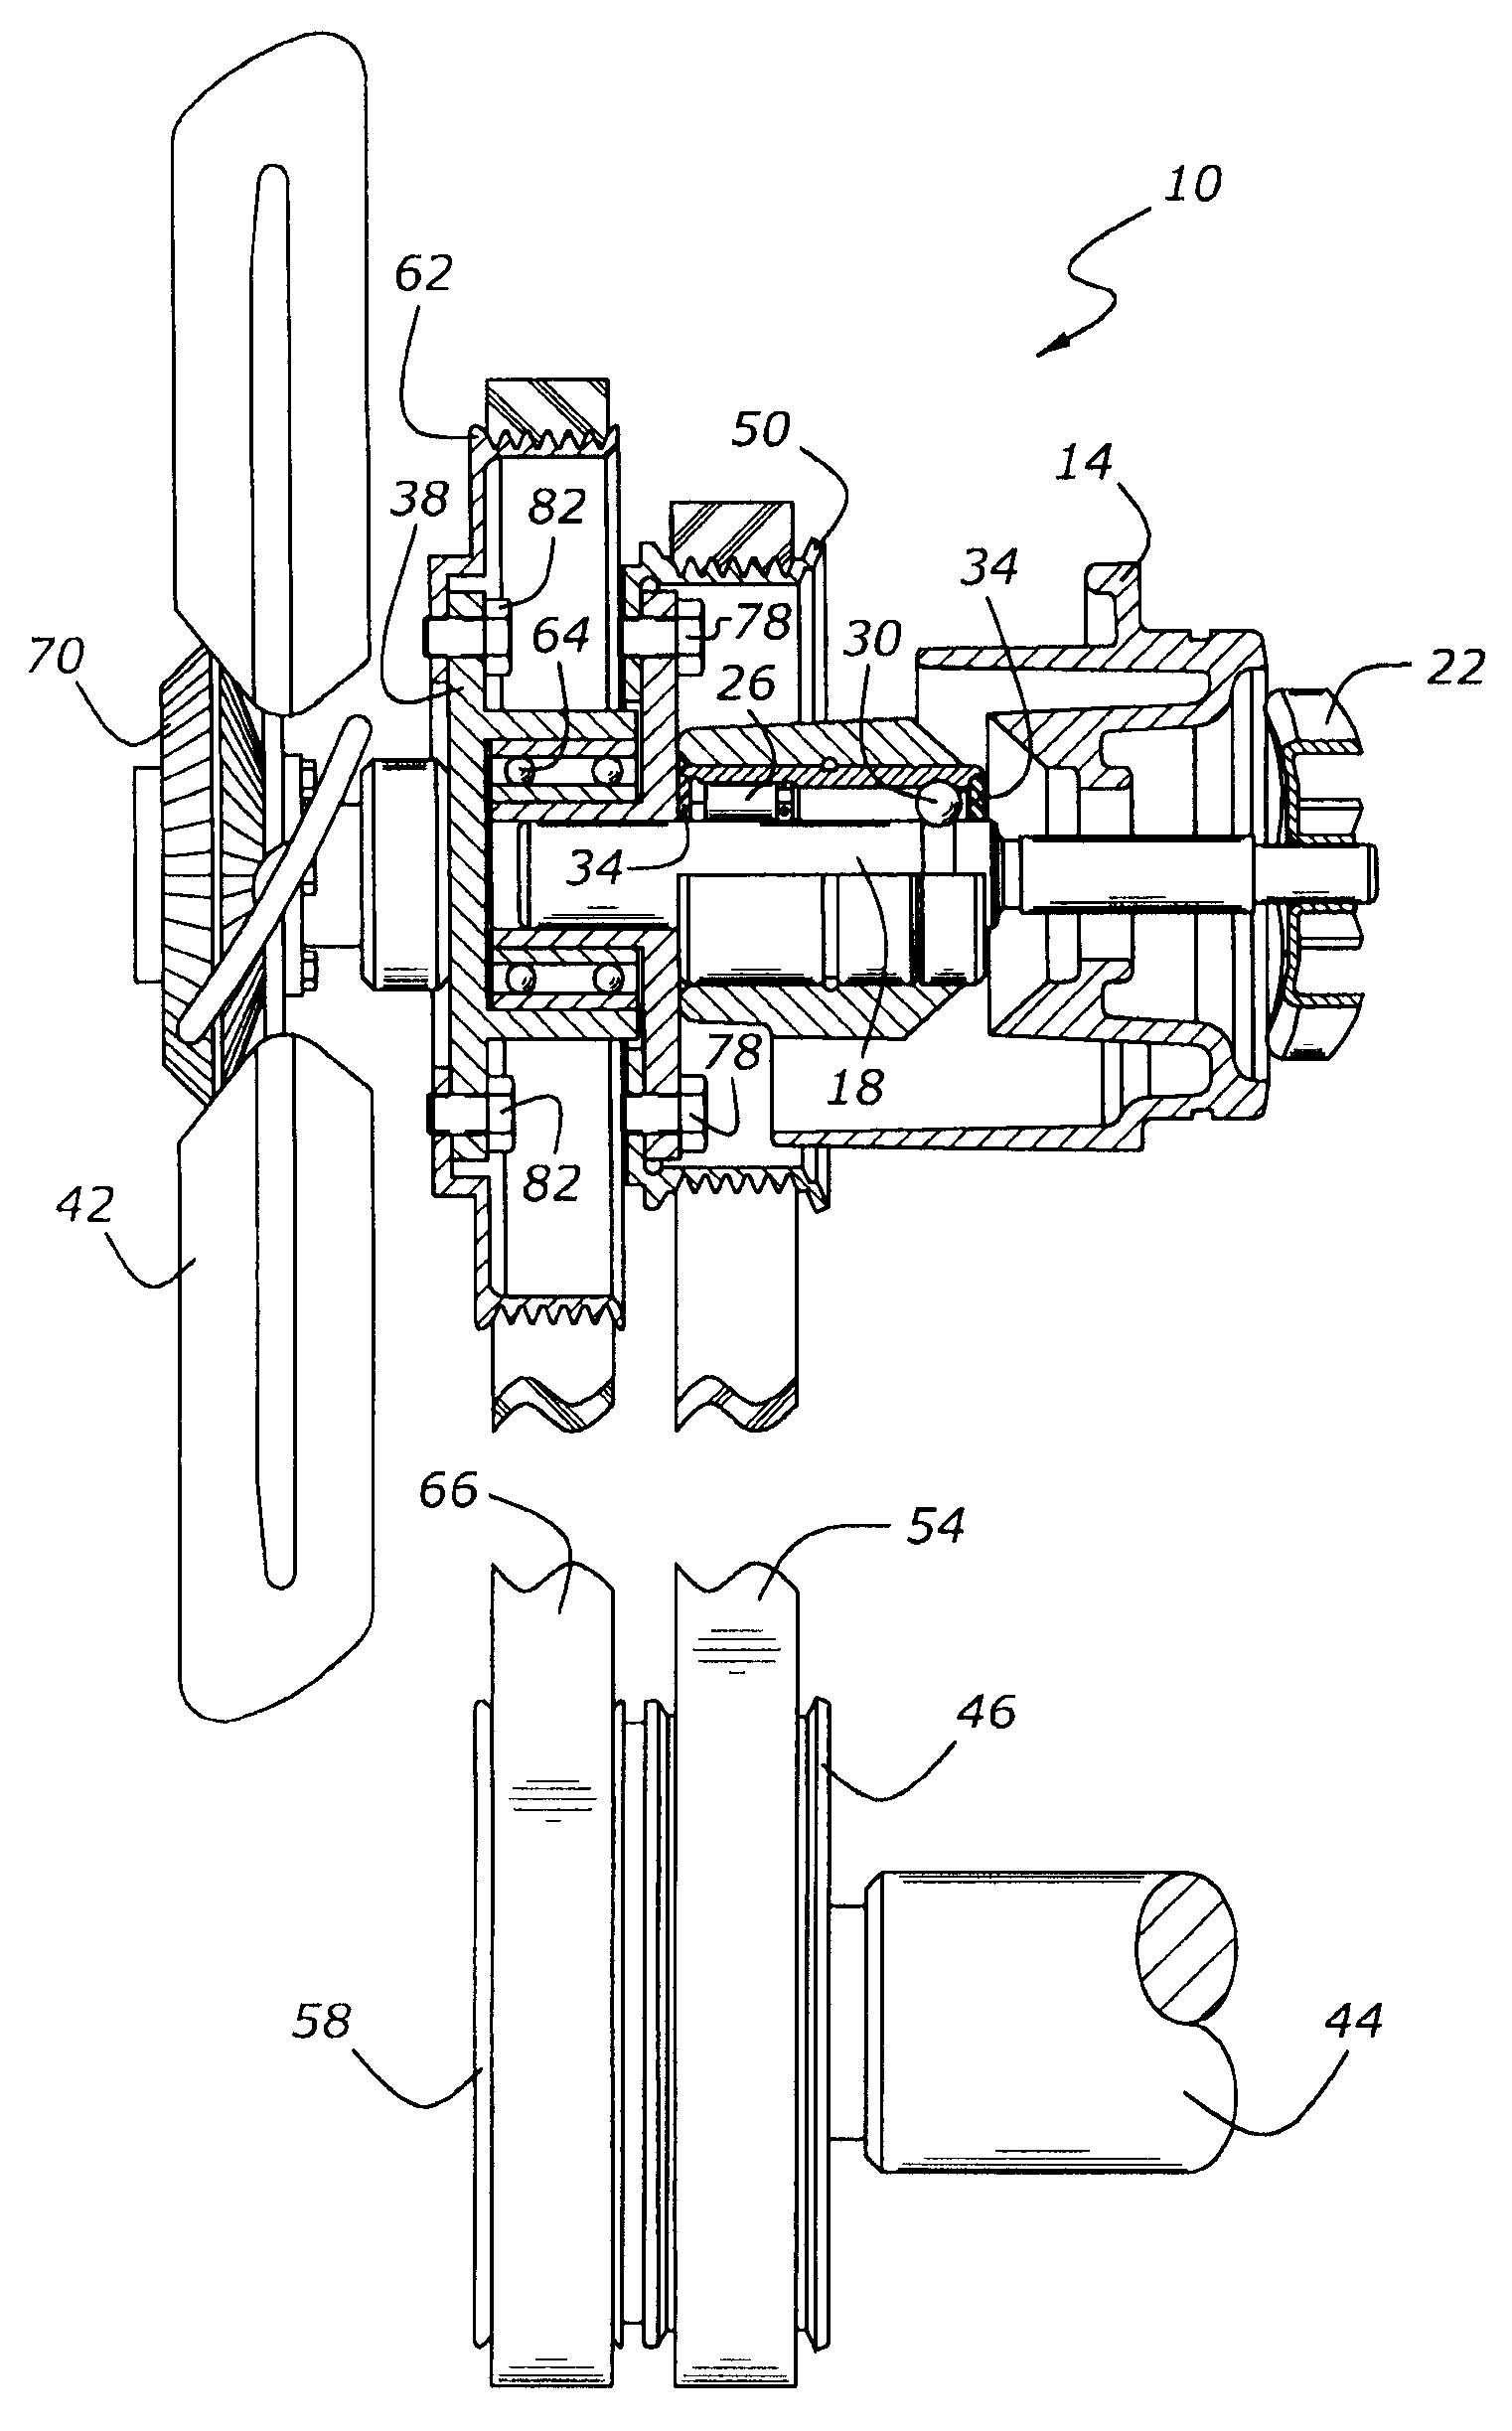 Dual drive radiator fan and coolant pump system for an internal combustion engine